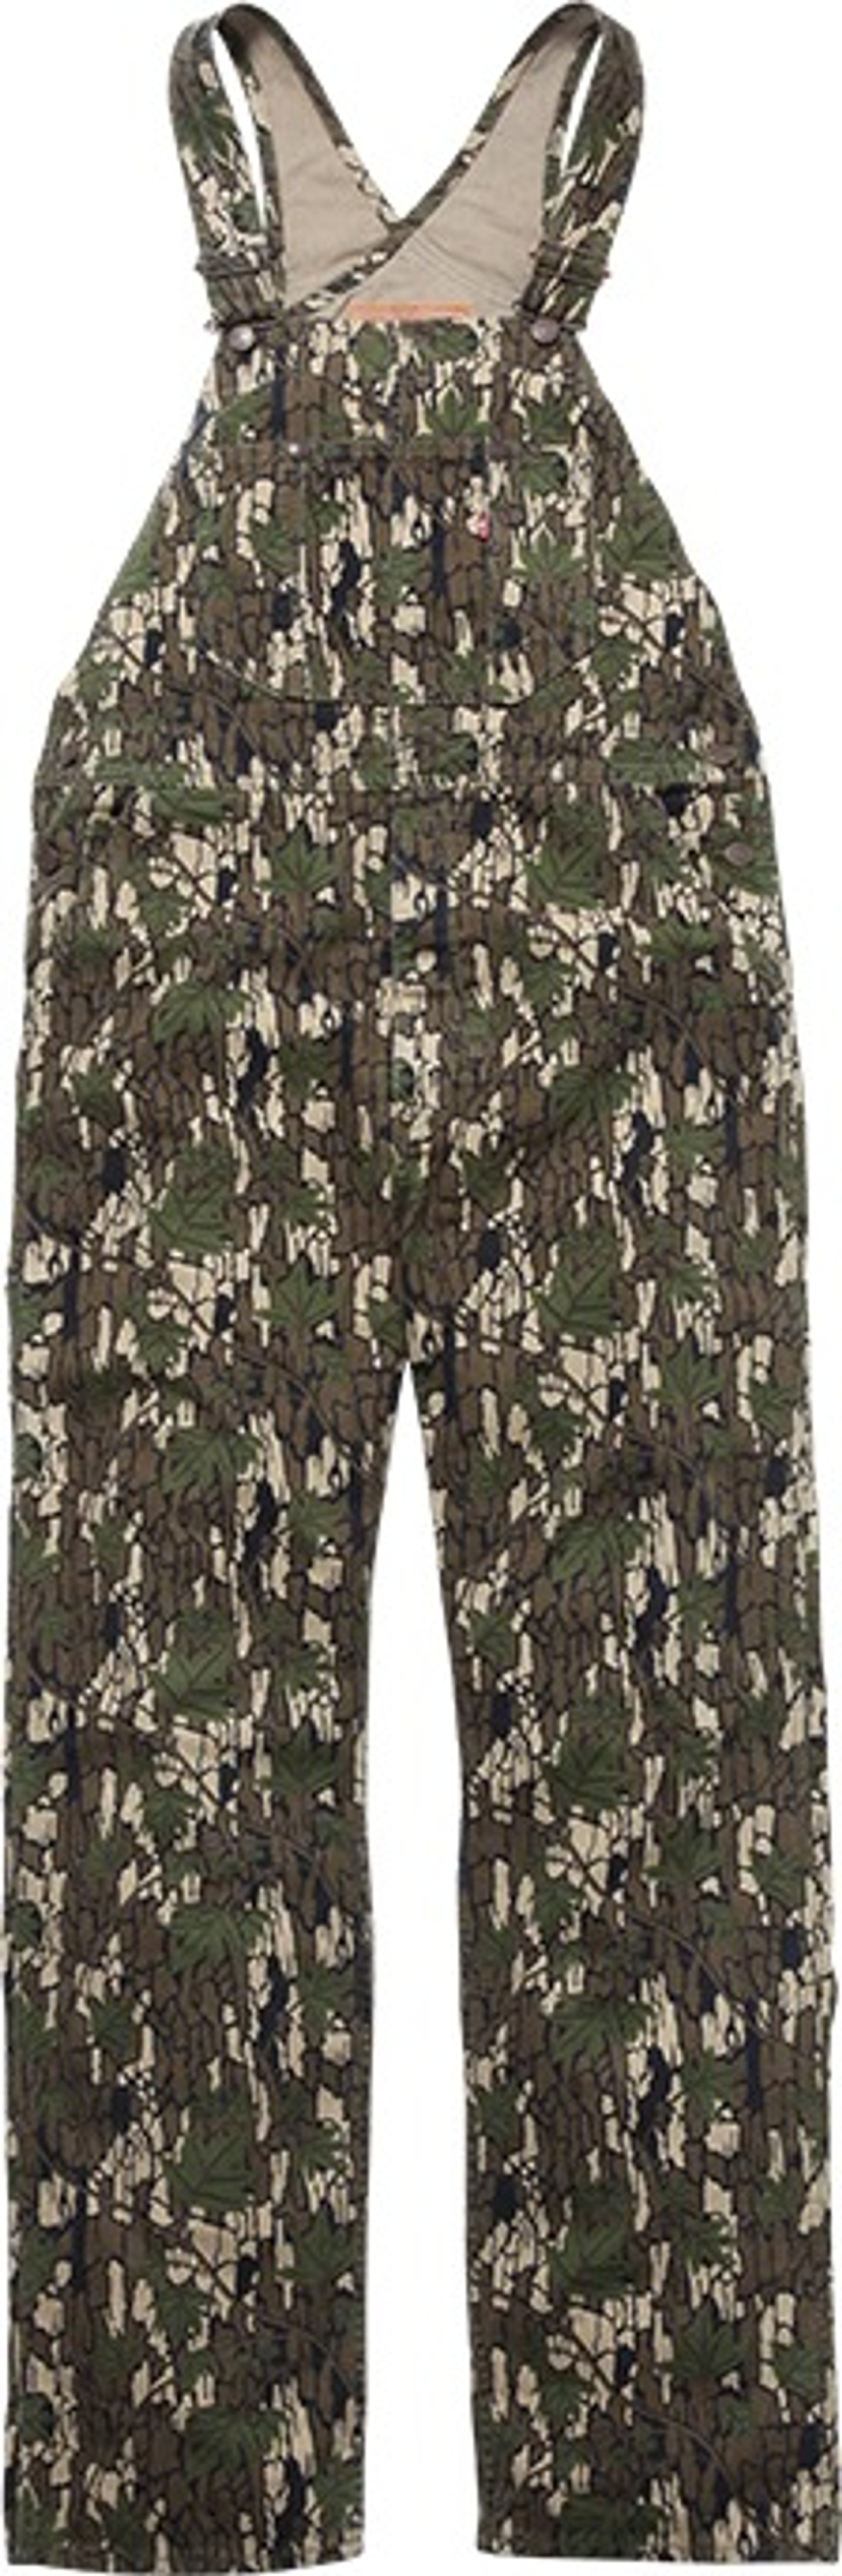 Camouflage Canvas Overall's (6/12)